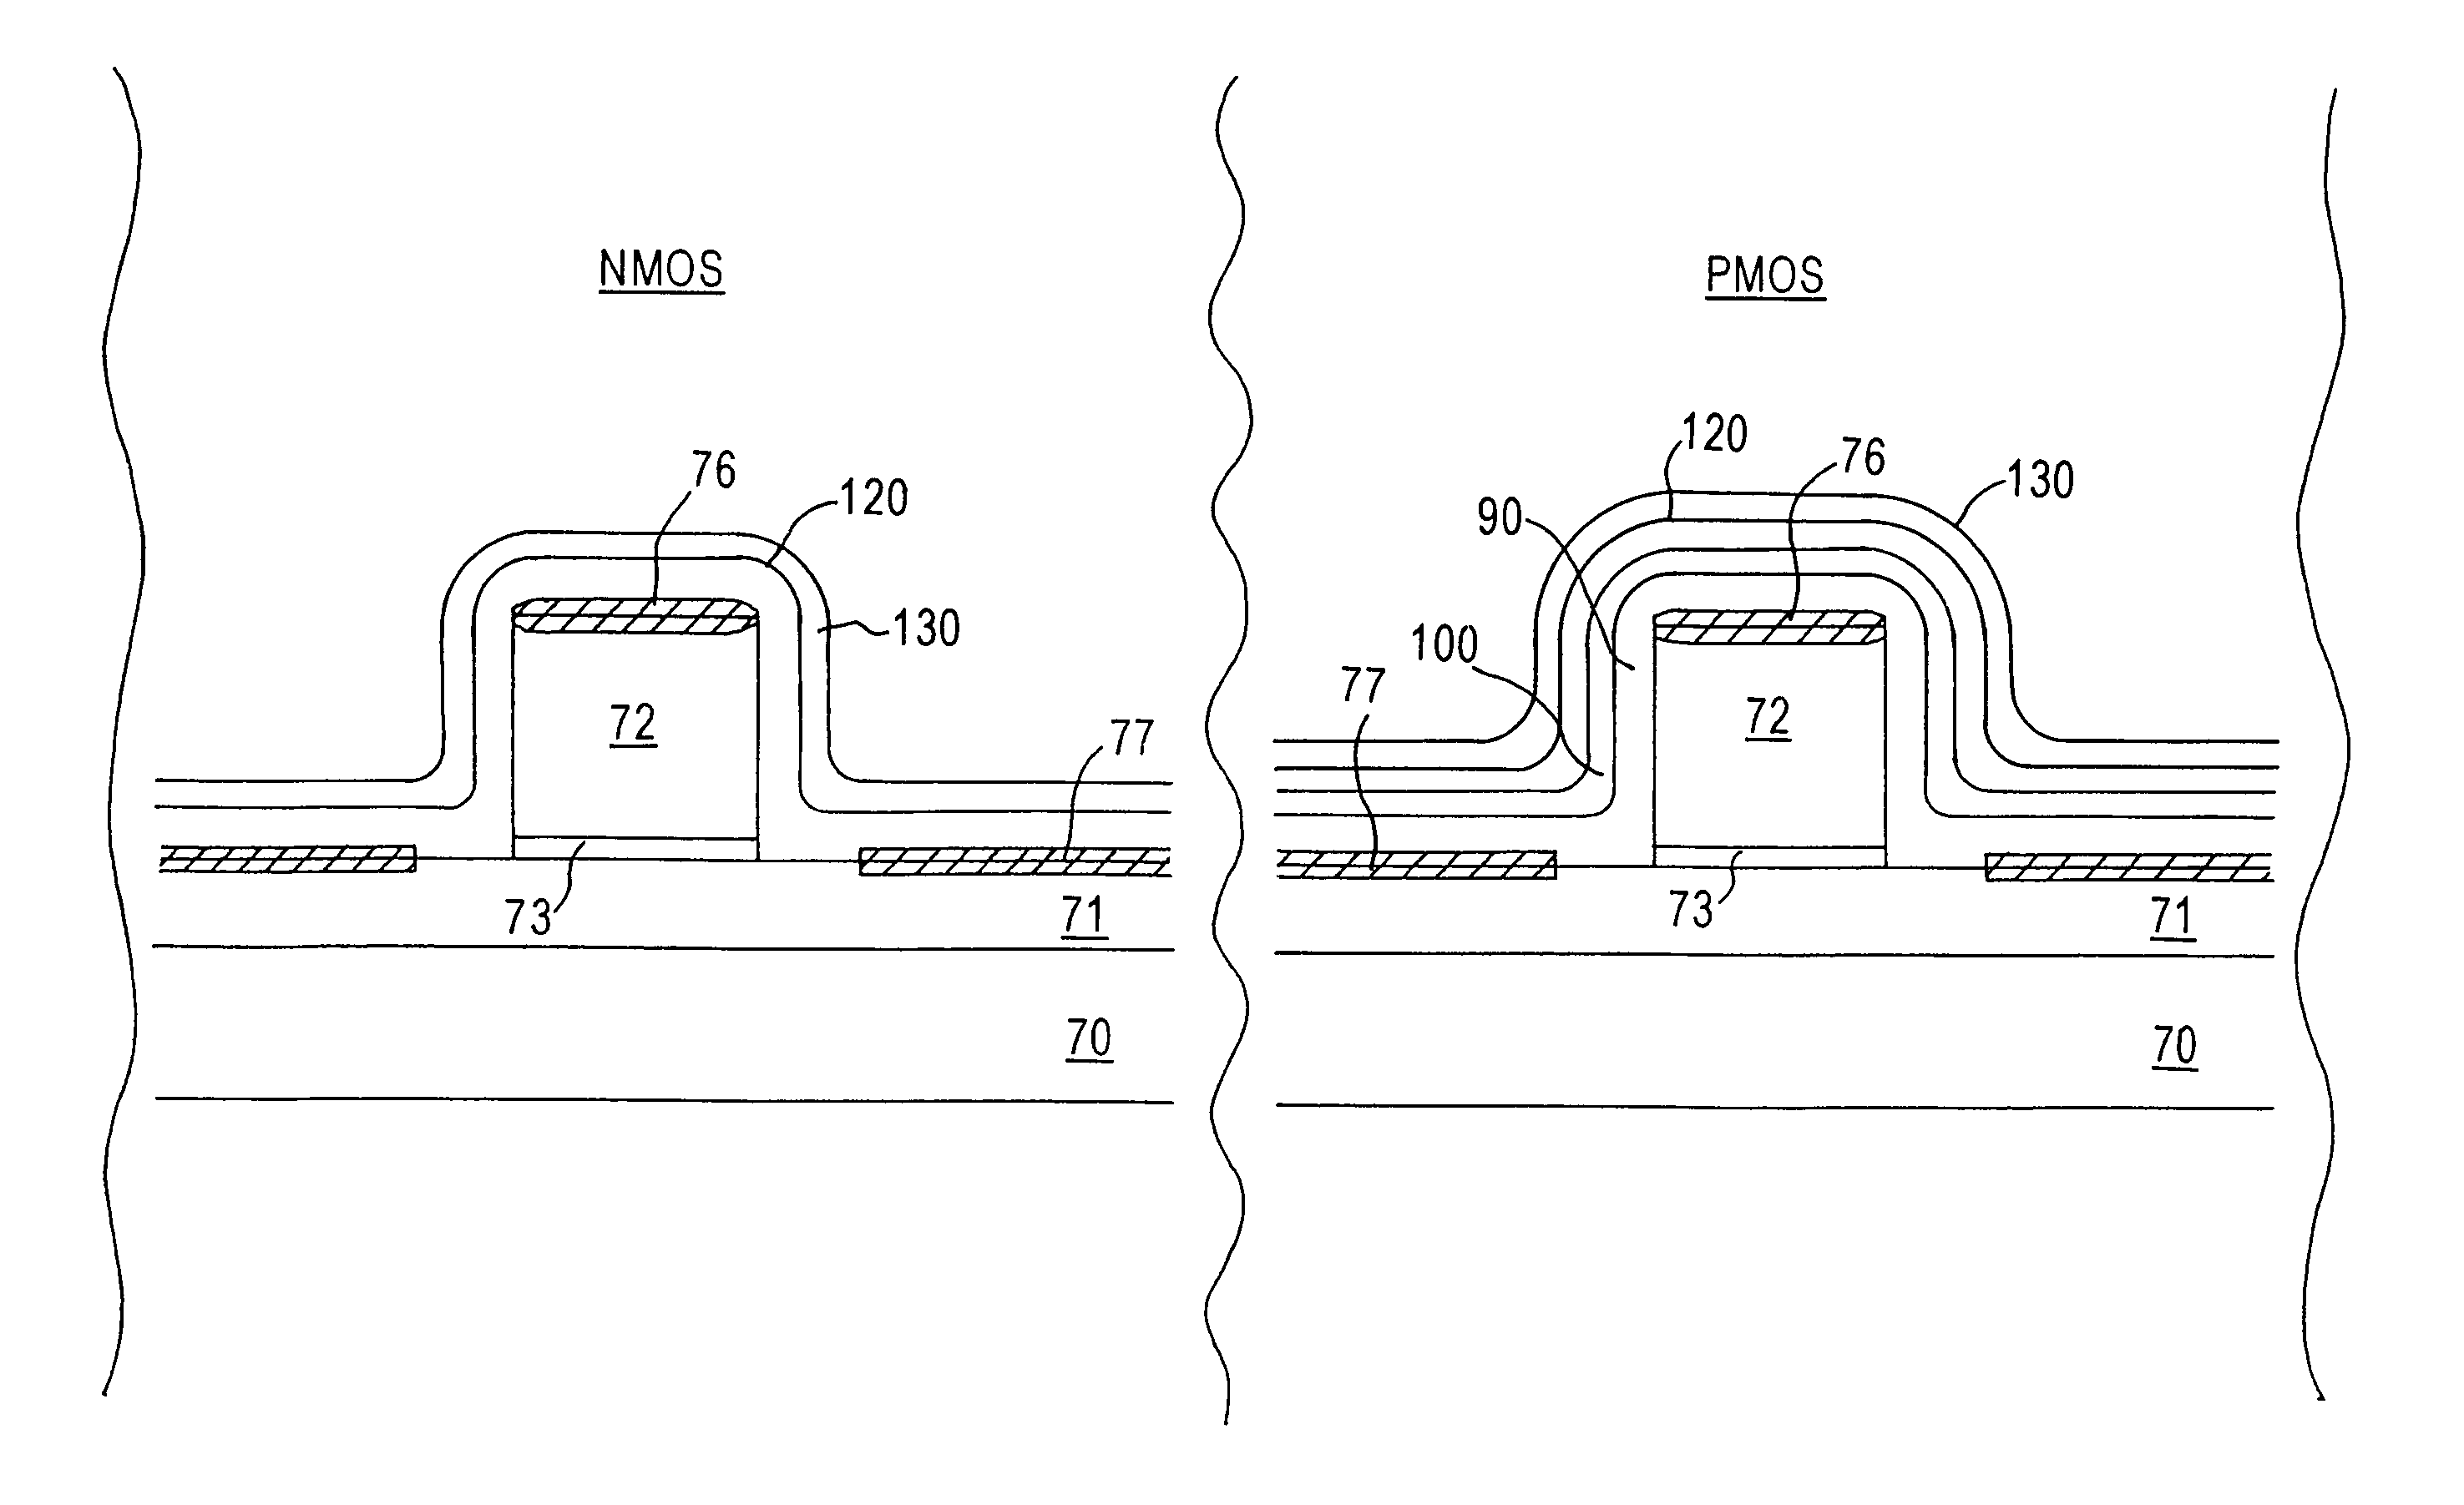 Semiconductor device based on Si-Ge with high stress liner for enhanced channel carrier mobility